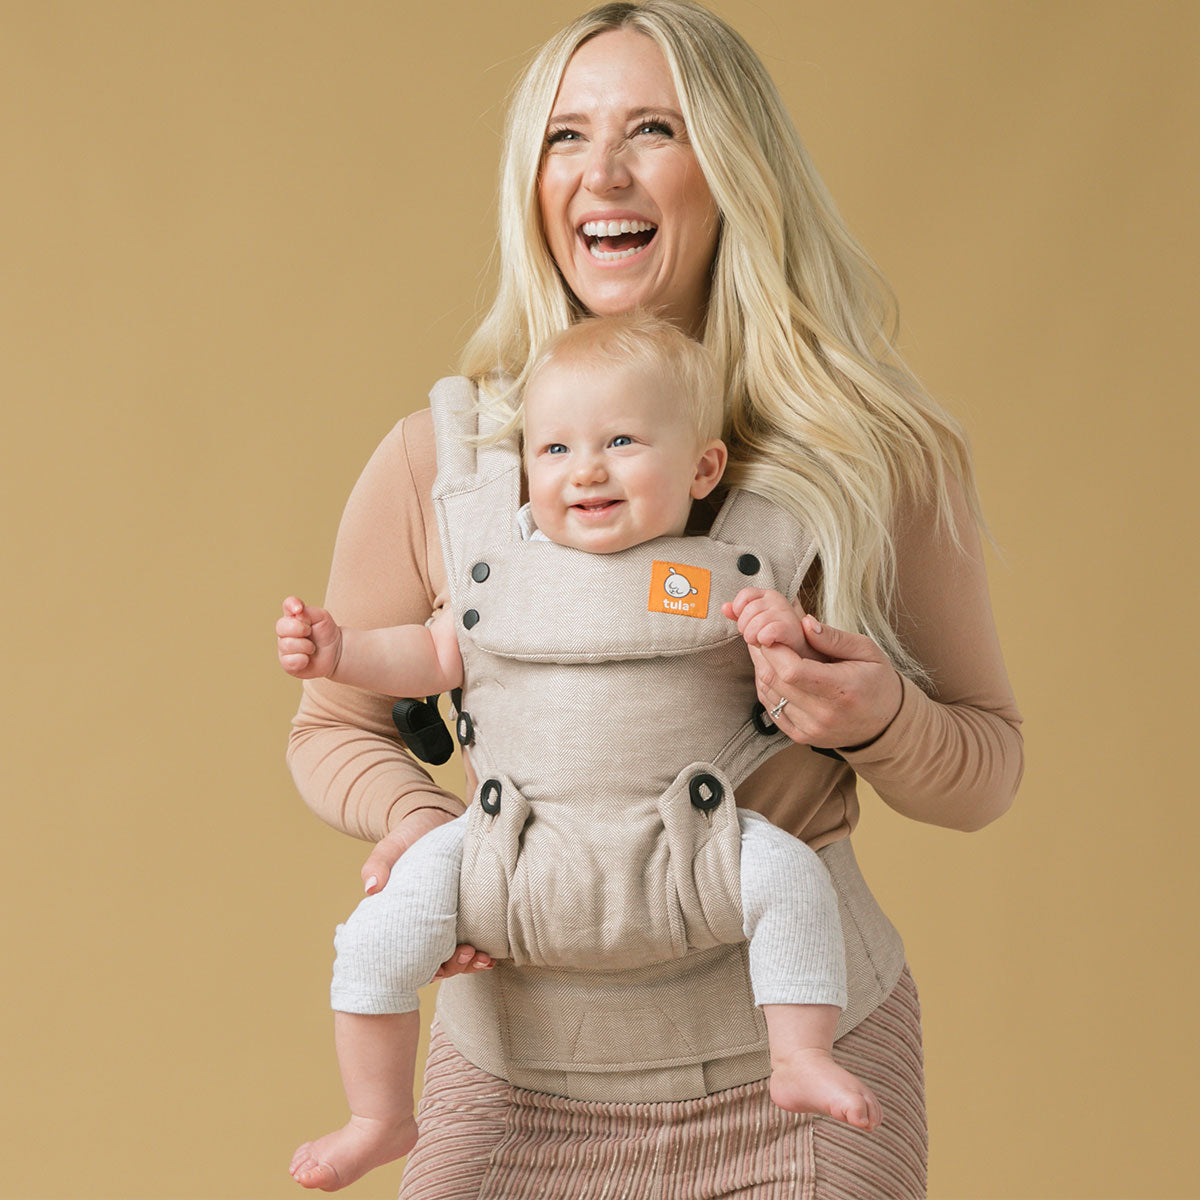 Happy mum babywearing her child in Tula Explore carrier in forward facing position